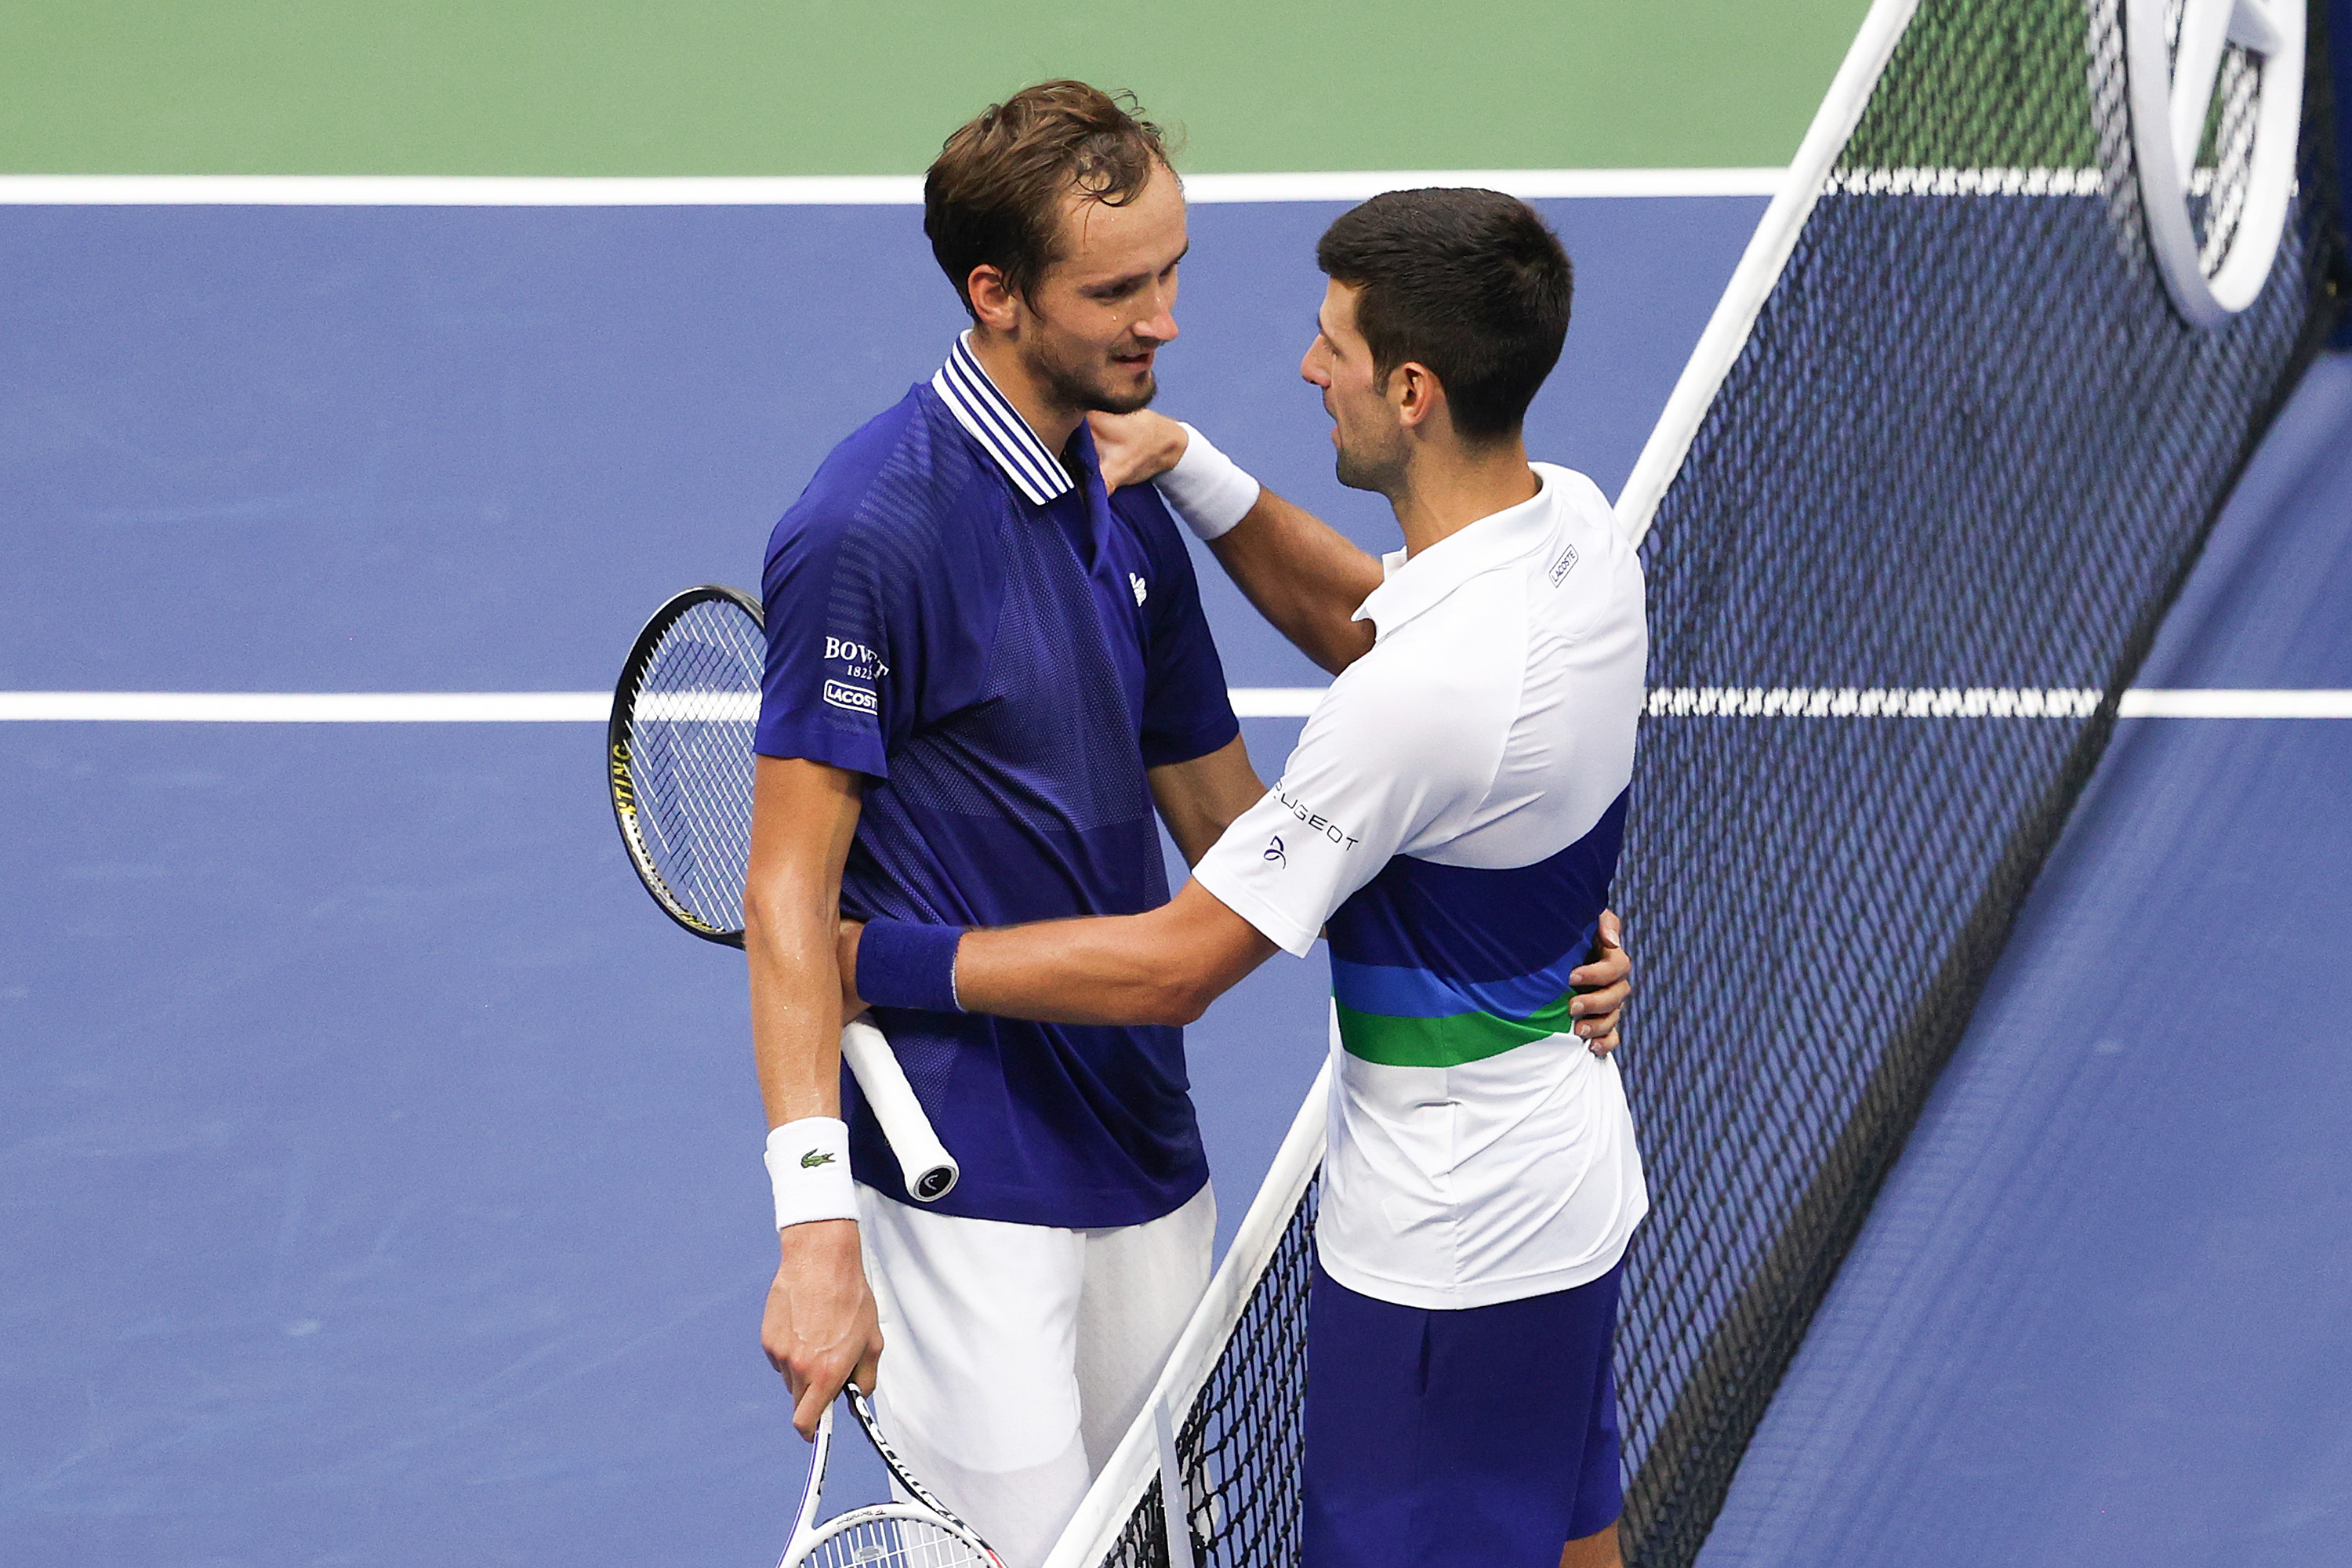 Daniil Medvedev (L) of Russia and Novak Djokovic (R) of Serbia talk at center court after Medvedev won their Men’s Singles final match on Day Fourteen of the 2021 US Open at the USTA Billie Jean King National Tennis Center on September 12, 2021 in the Flushing neighborhood of the Queens borough of New York City.